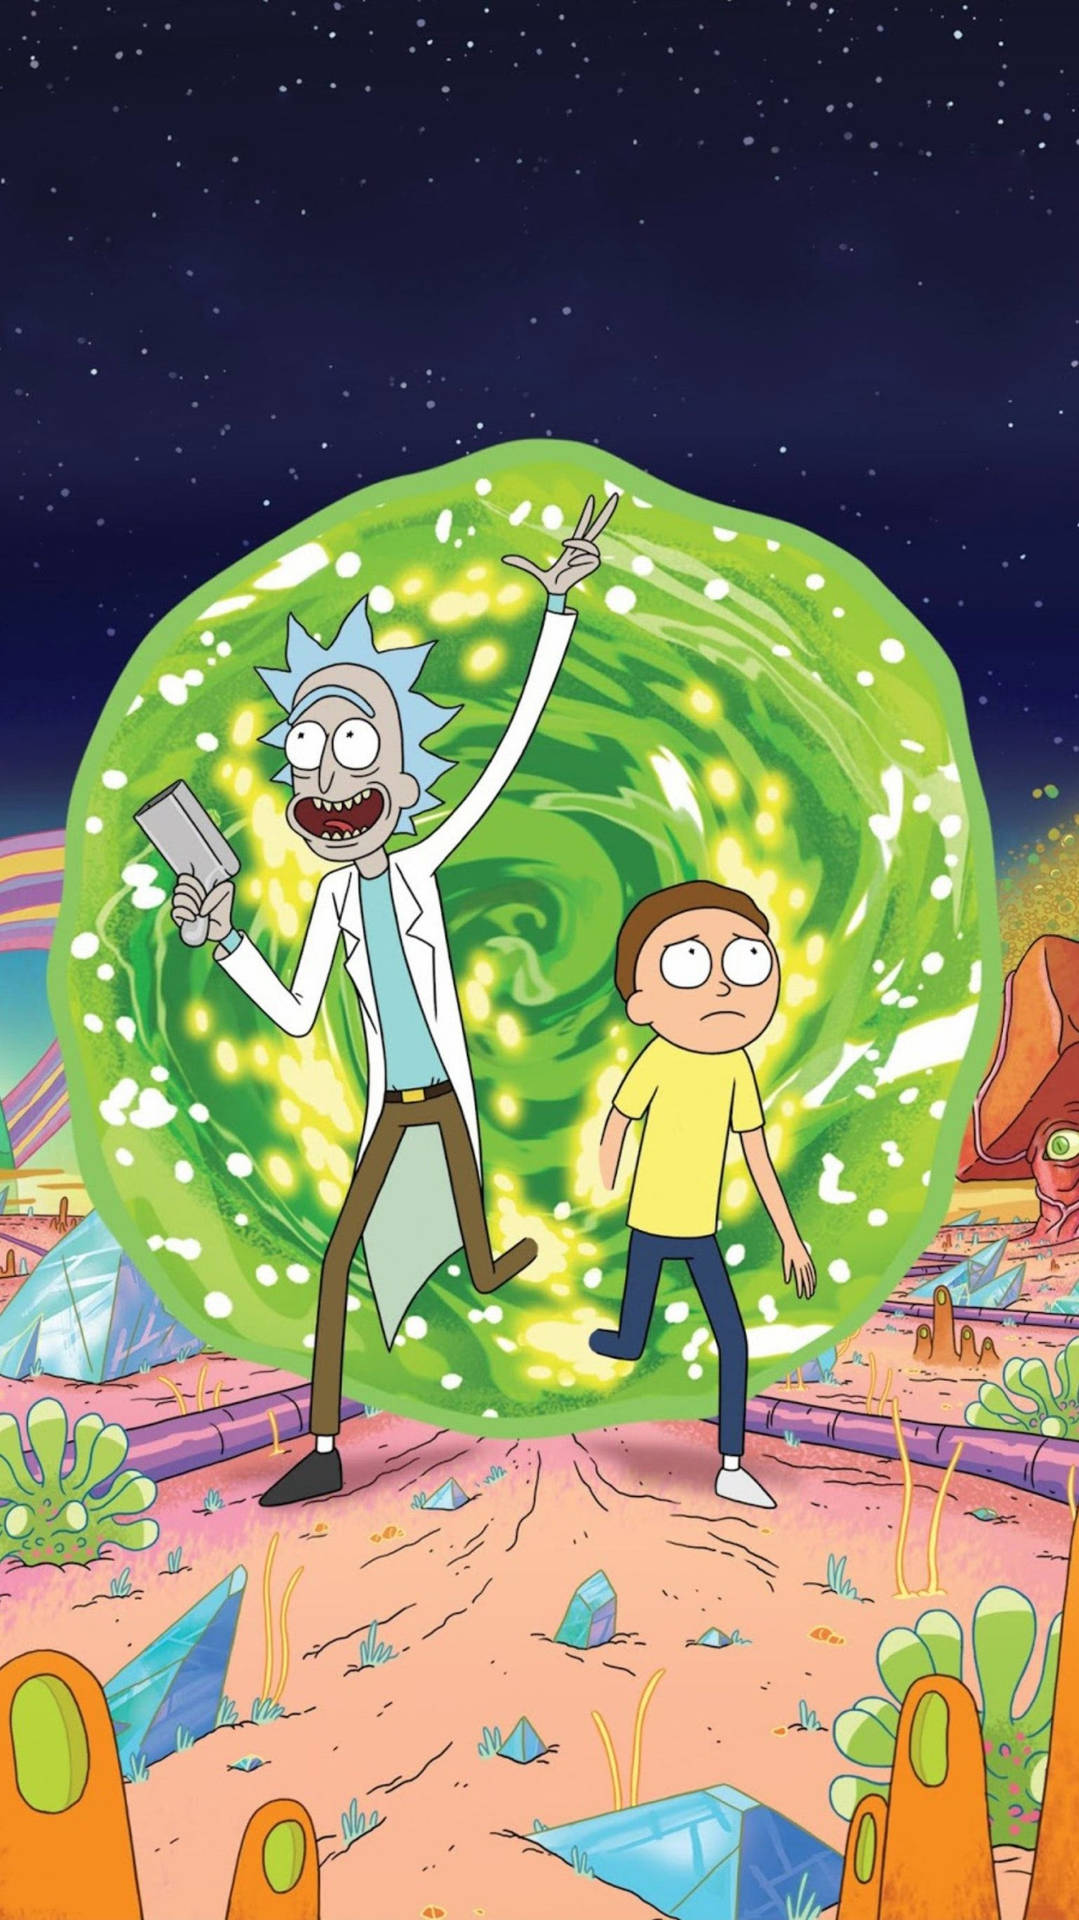 Rick and Morty come out of a portal together Wallpaper